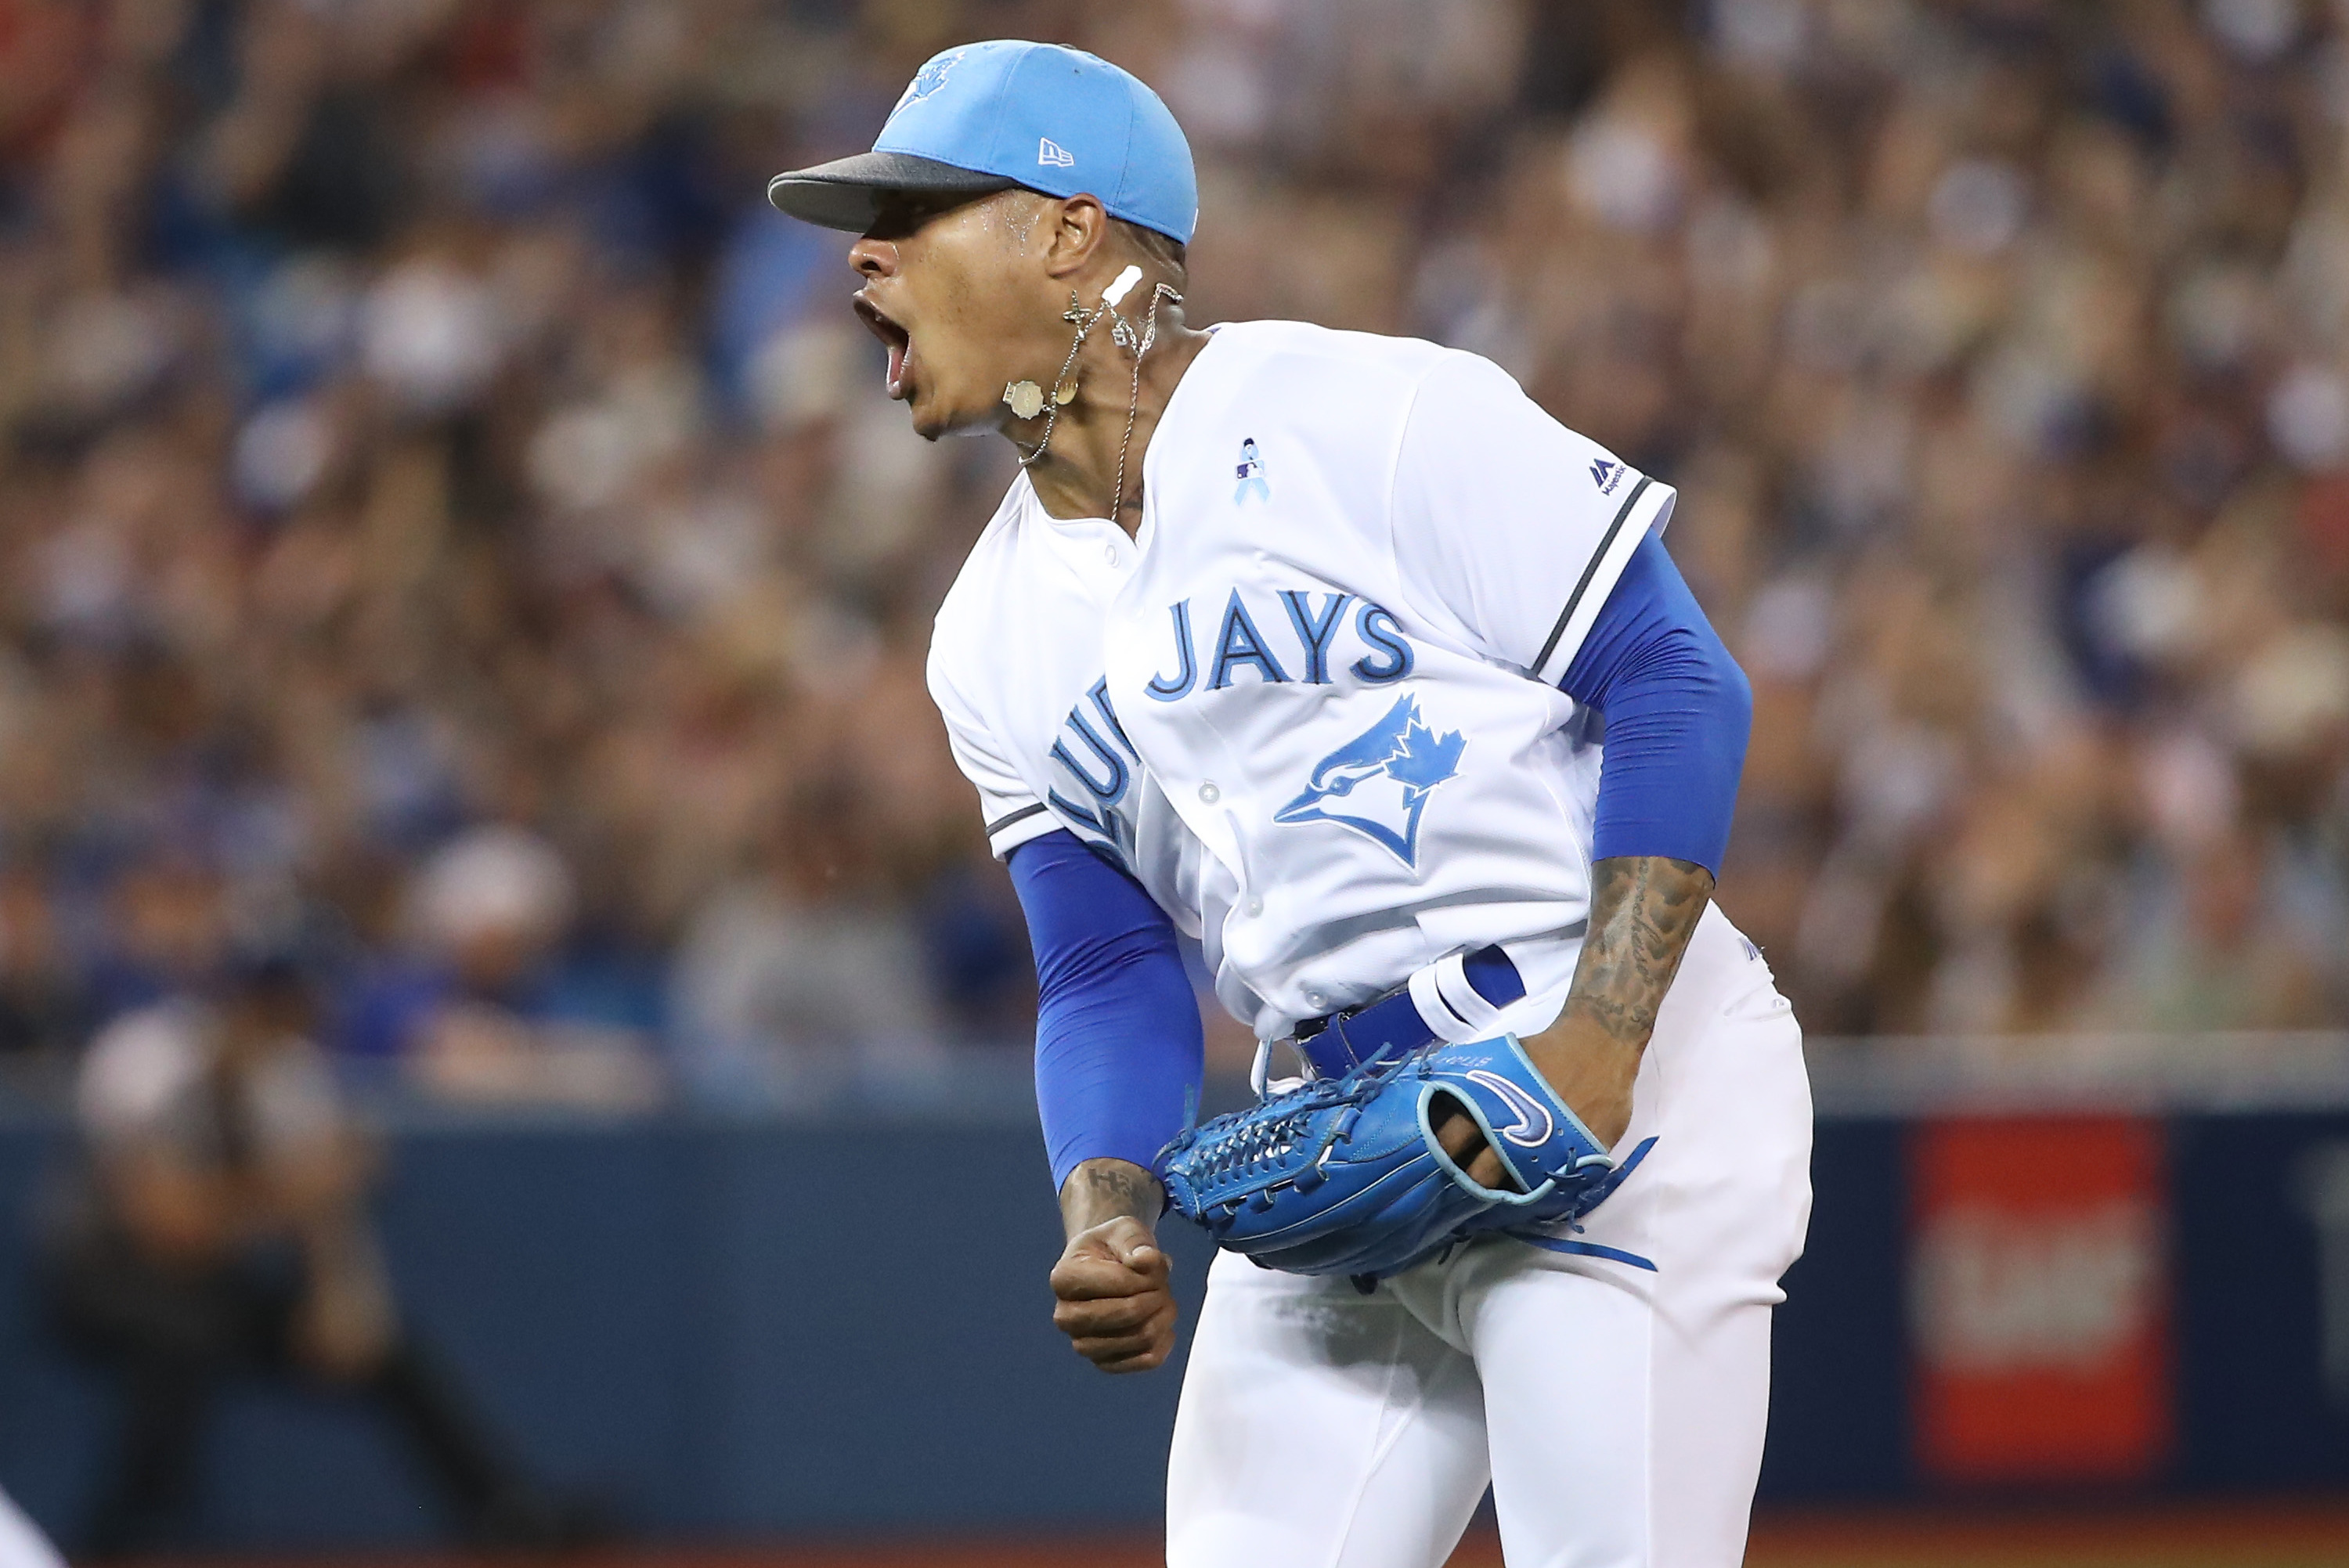 Marcus Stroman doesn't necessarily get high marks, but gets a win